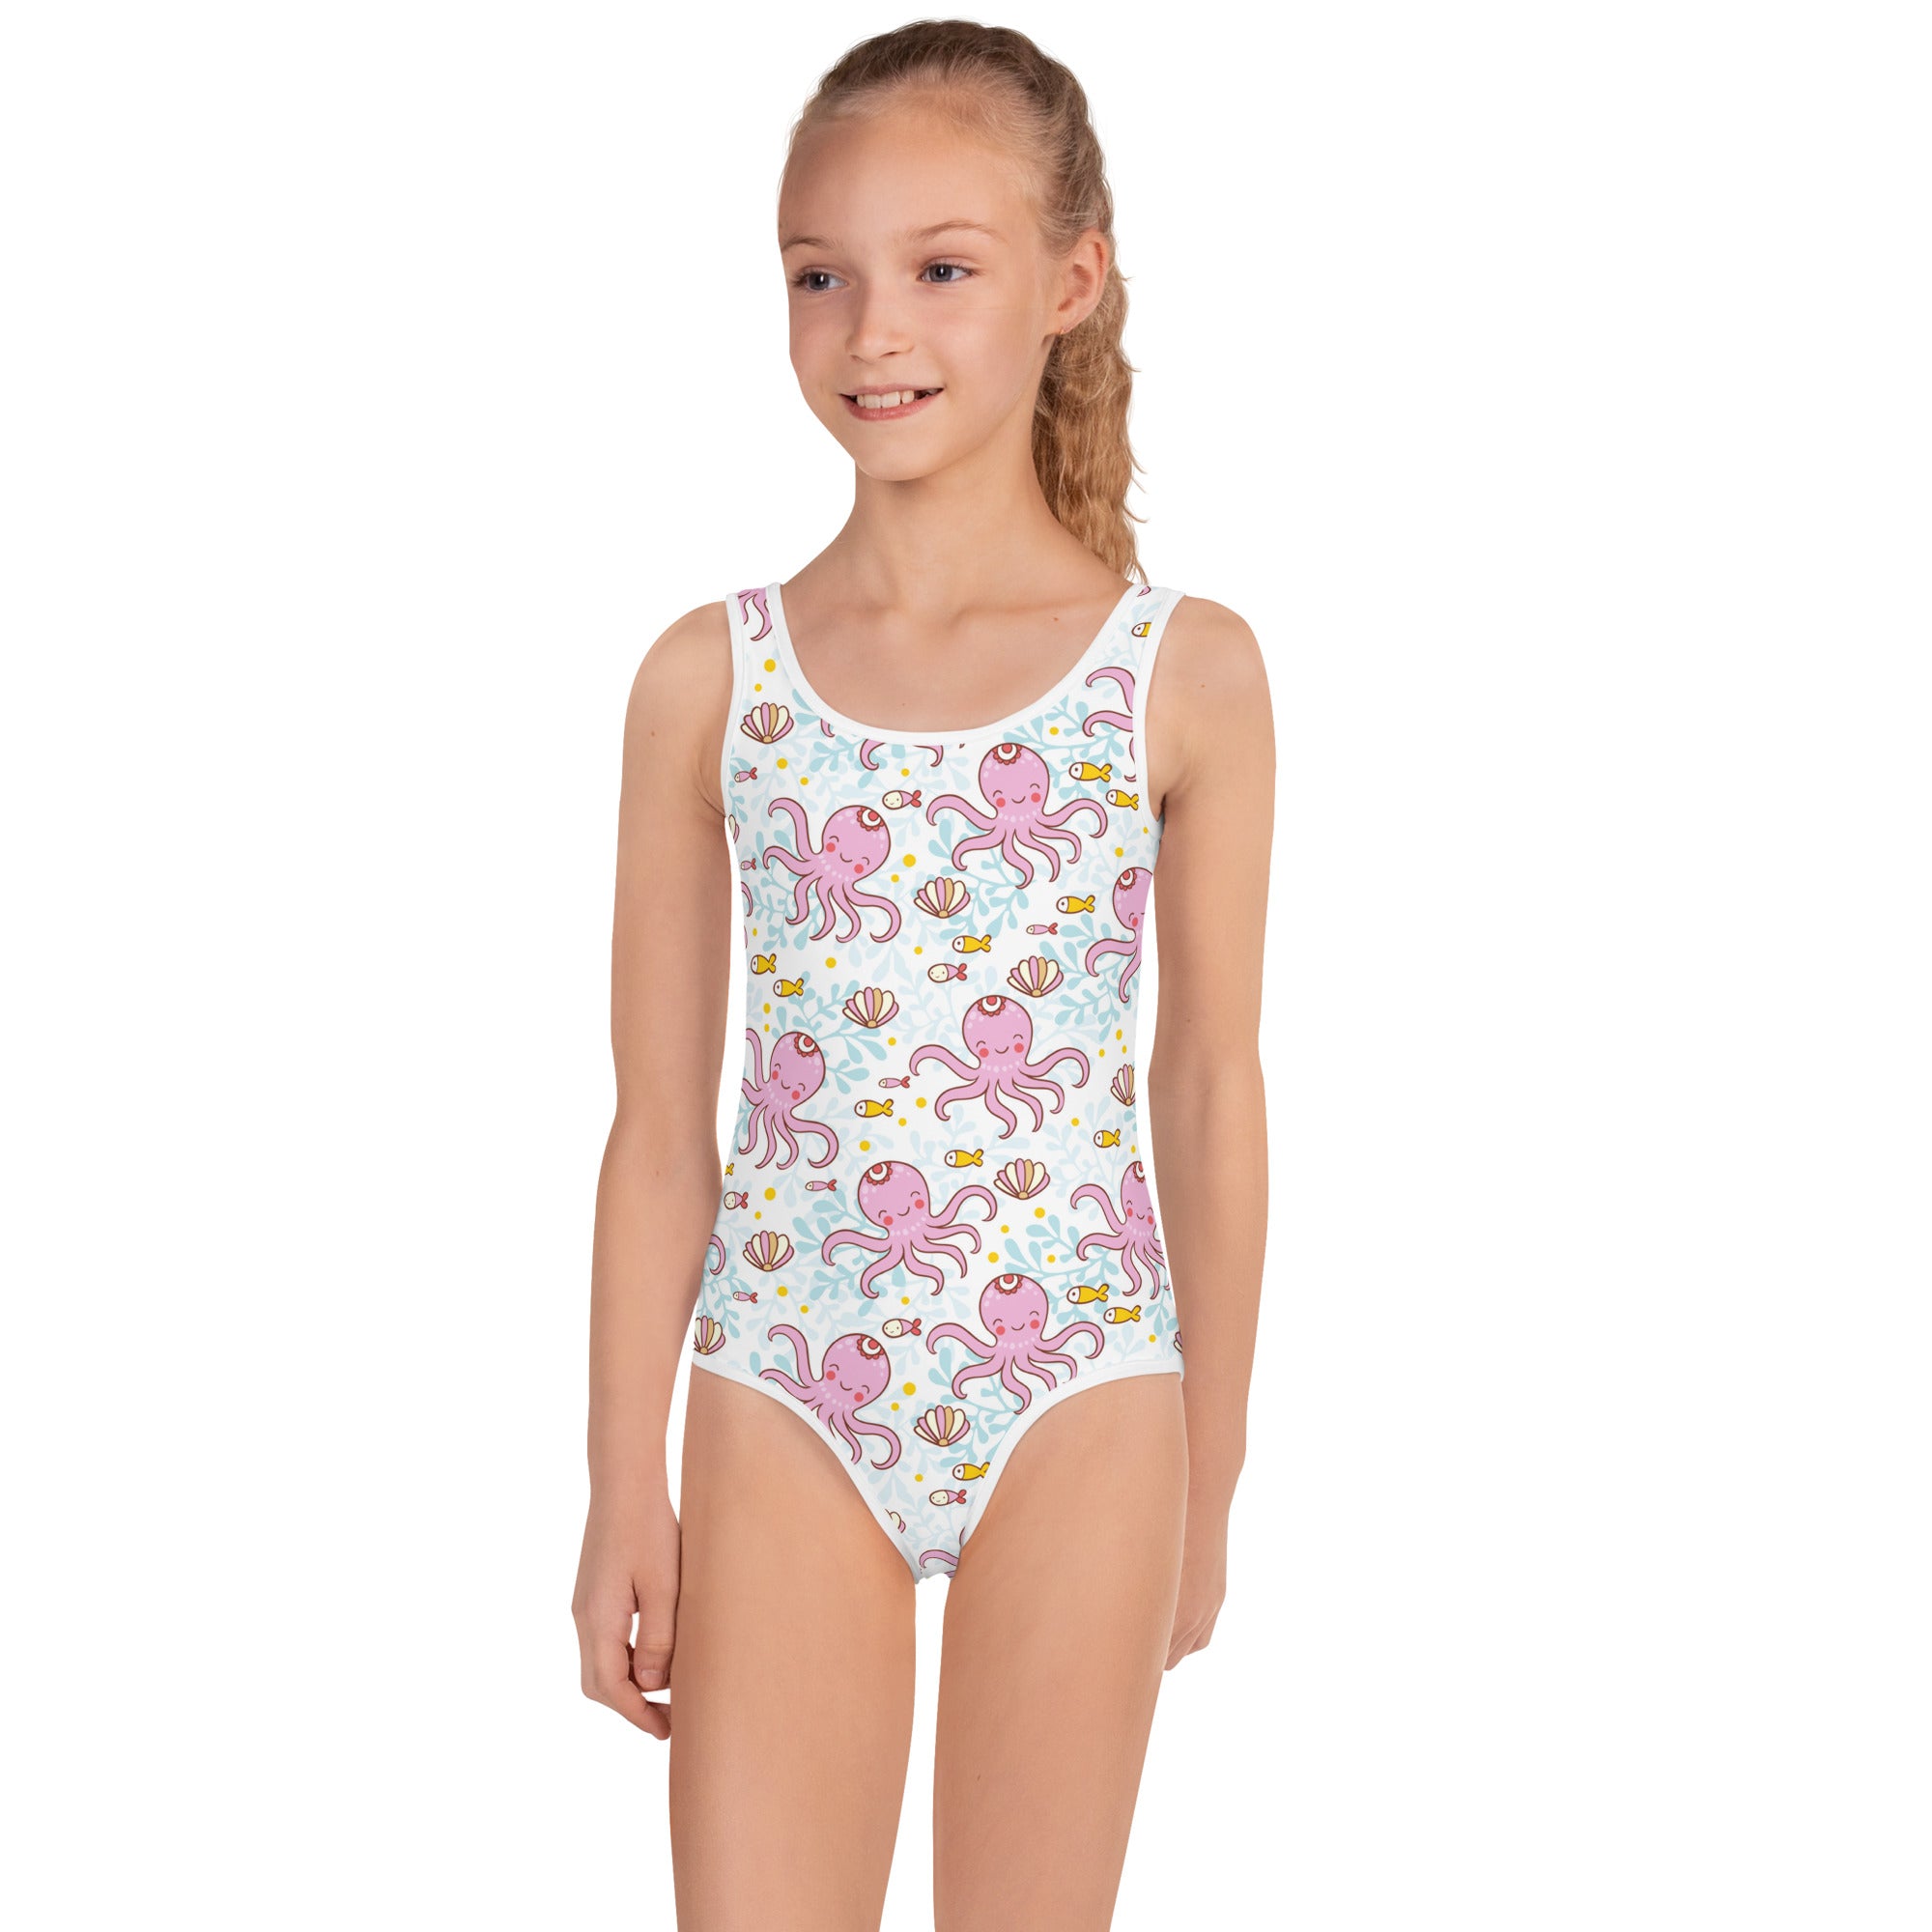 Kids' Printed One-Piece Swimsuit - Pinky the Octopus's Playground